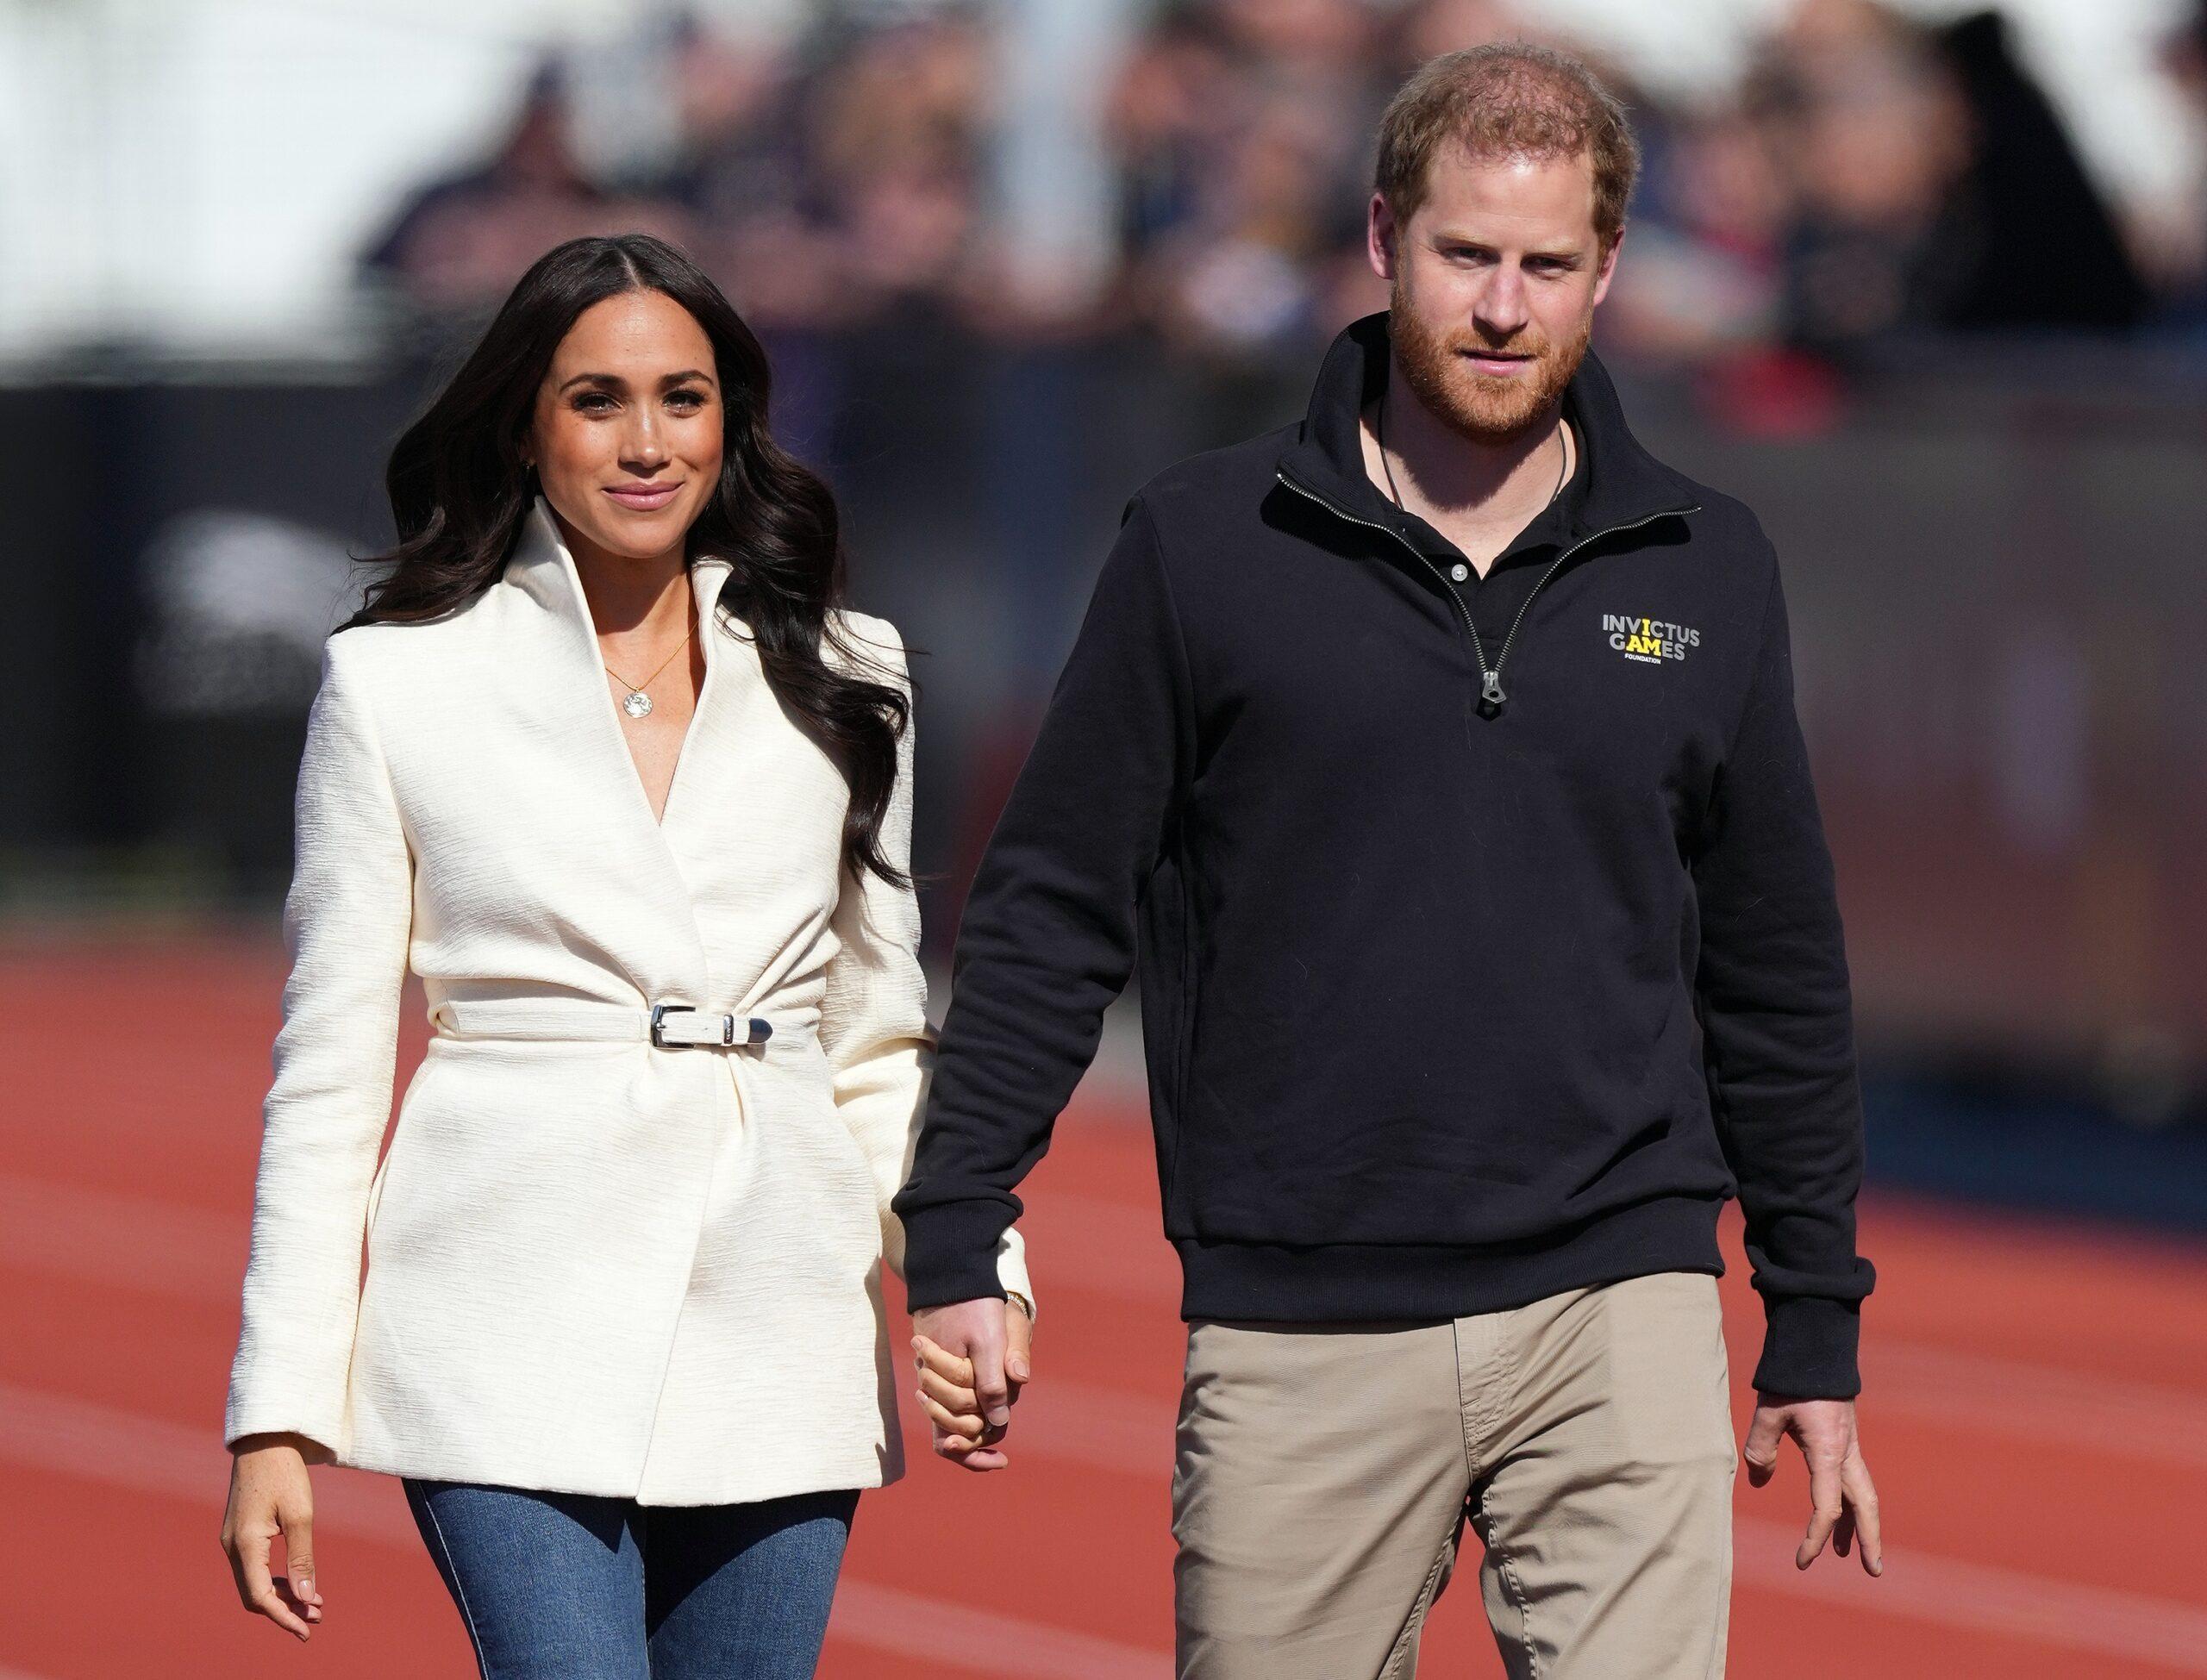 Harry and Meghan attend day 2 of the Invictus Games The Duke and Duchess of Sussex watch the track and field competition on day 2 of the Invictus Games